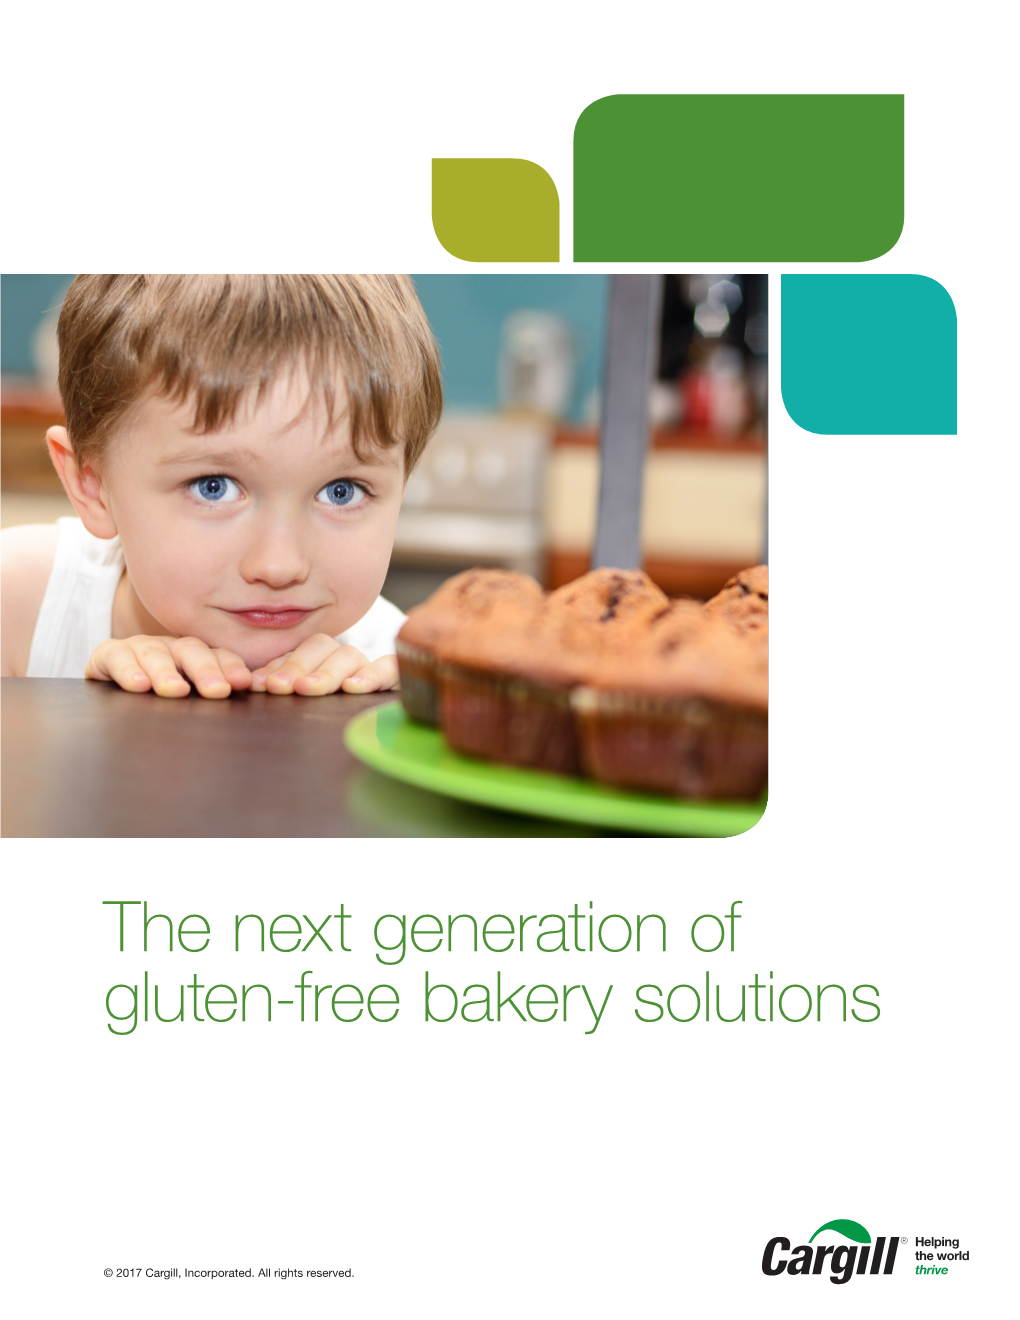 The Next Generation of Gluten-Free Bakery Solutions